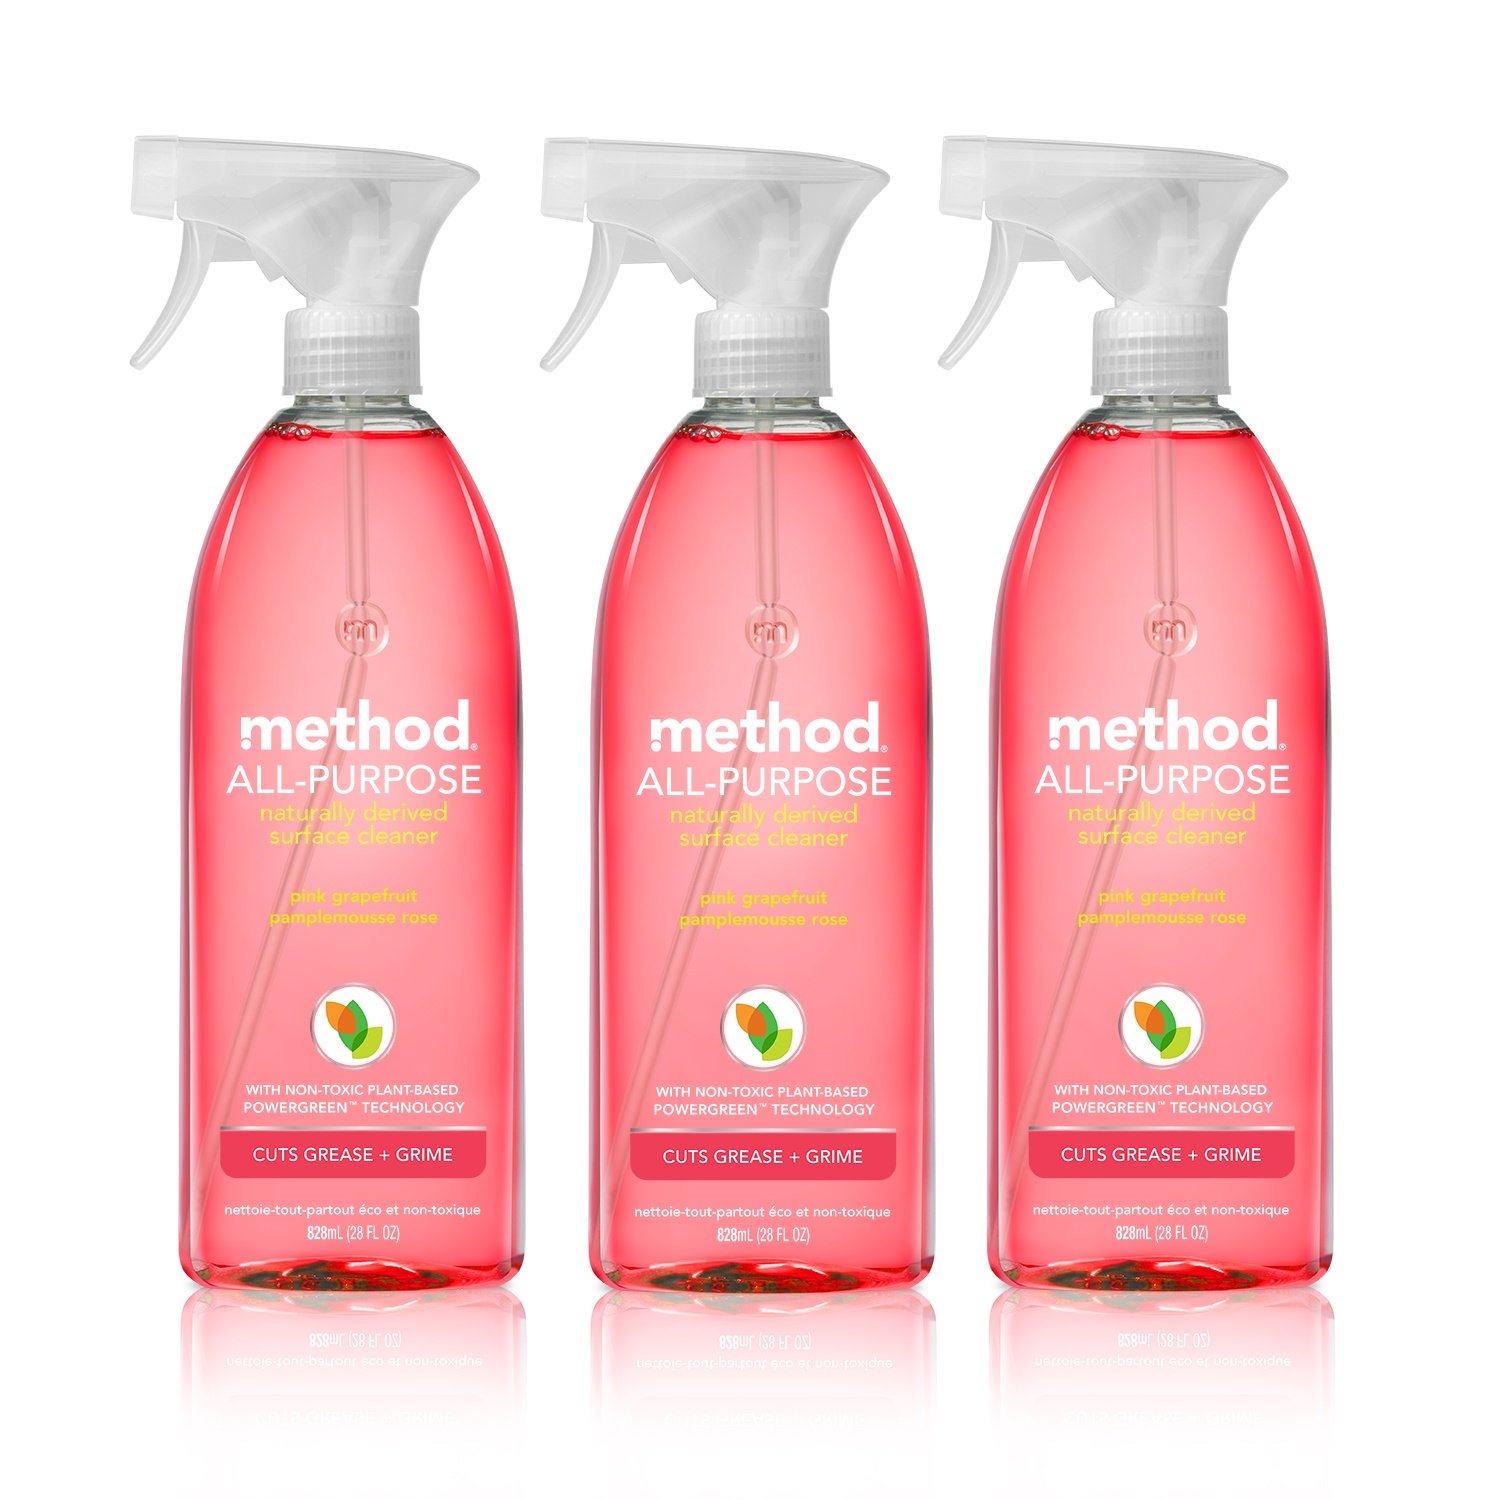 best eco-friendly cleaning products - method all purpose cleaner